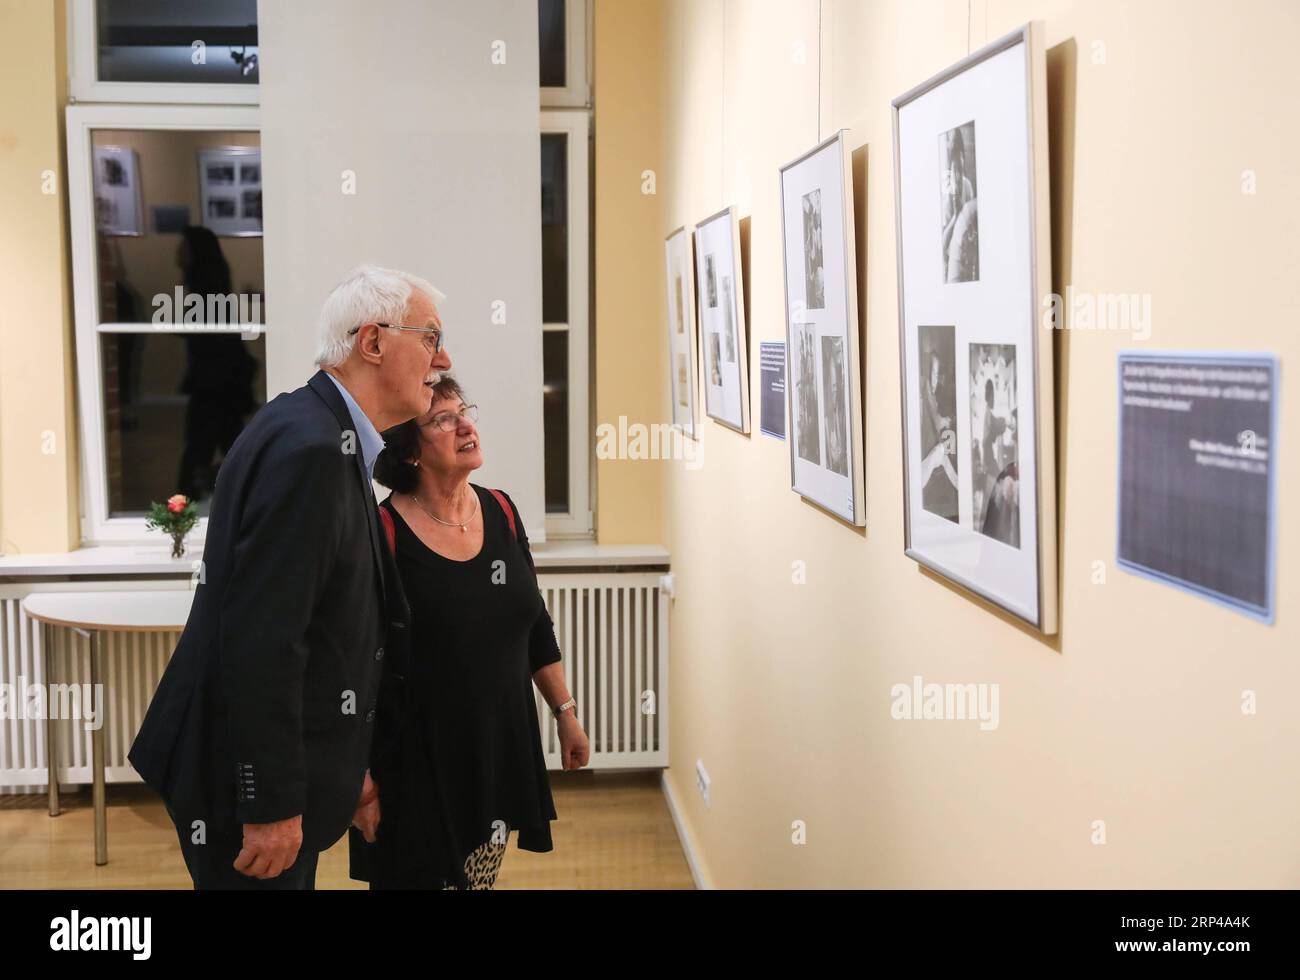 (181101) -- BERLIN, Nov. 1, 2018 -- Visitors look at photos at a photography exhibition of Chinese photographer Eva Siao, who was born in Germany and married Chinese poet Xiao San, at the Confucius Institute of Berlin Free University, in Berlin, capital of Germany, on Oct. 31, 2018. )(yk) GERMANY-BERLIN-EVA SIAO-PHOTOGRAPHY EXHIBITION ShanxYuqi PUBLICATIONxNOTxINxCHN Stock Photo